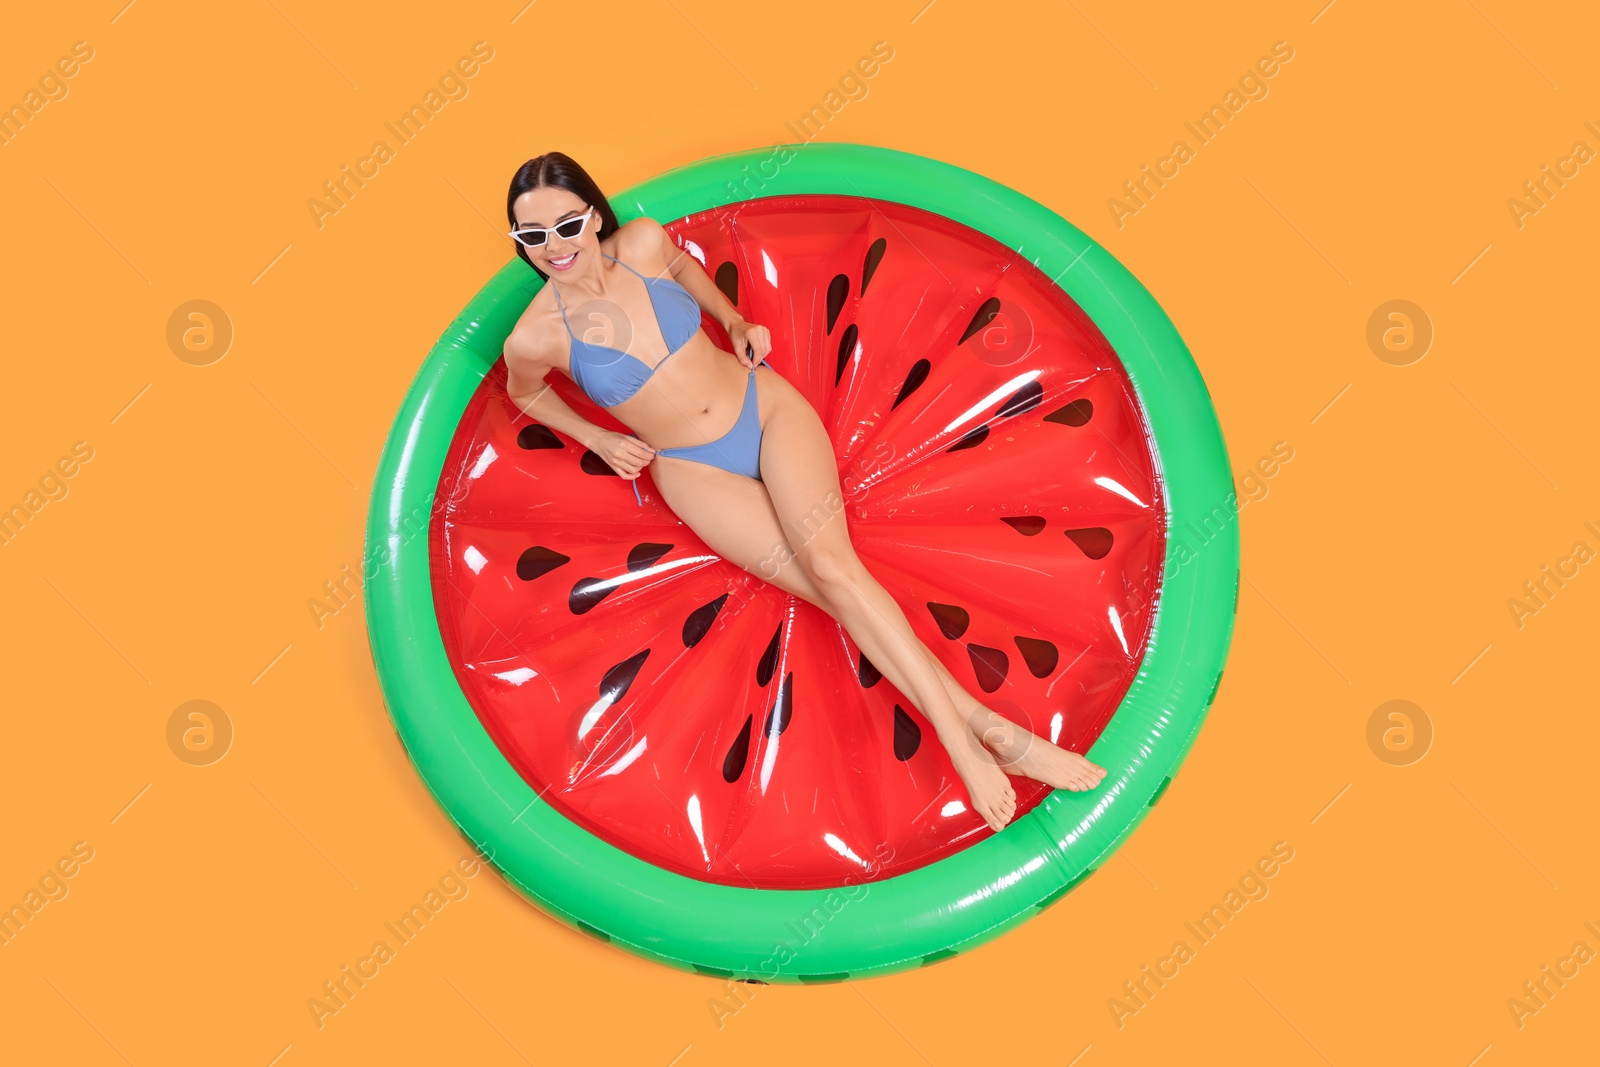 Photo of Happy young woman with beautiful suntan and sunglasses on inflatable mattress against orange background, top view